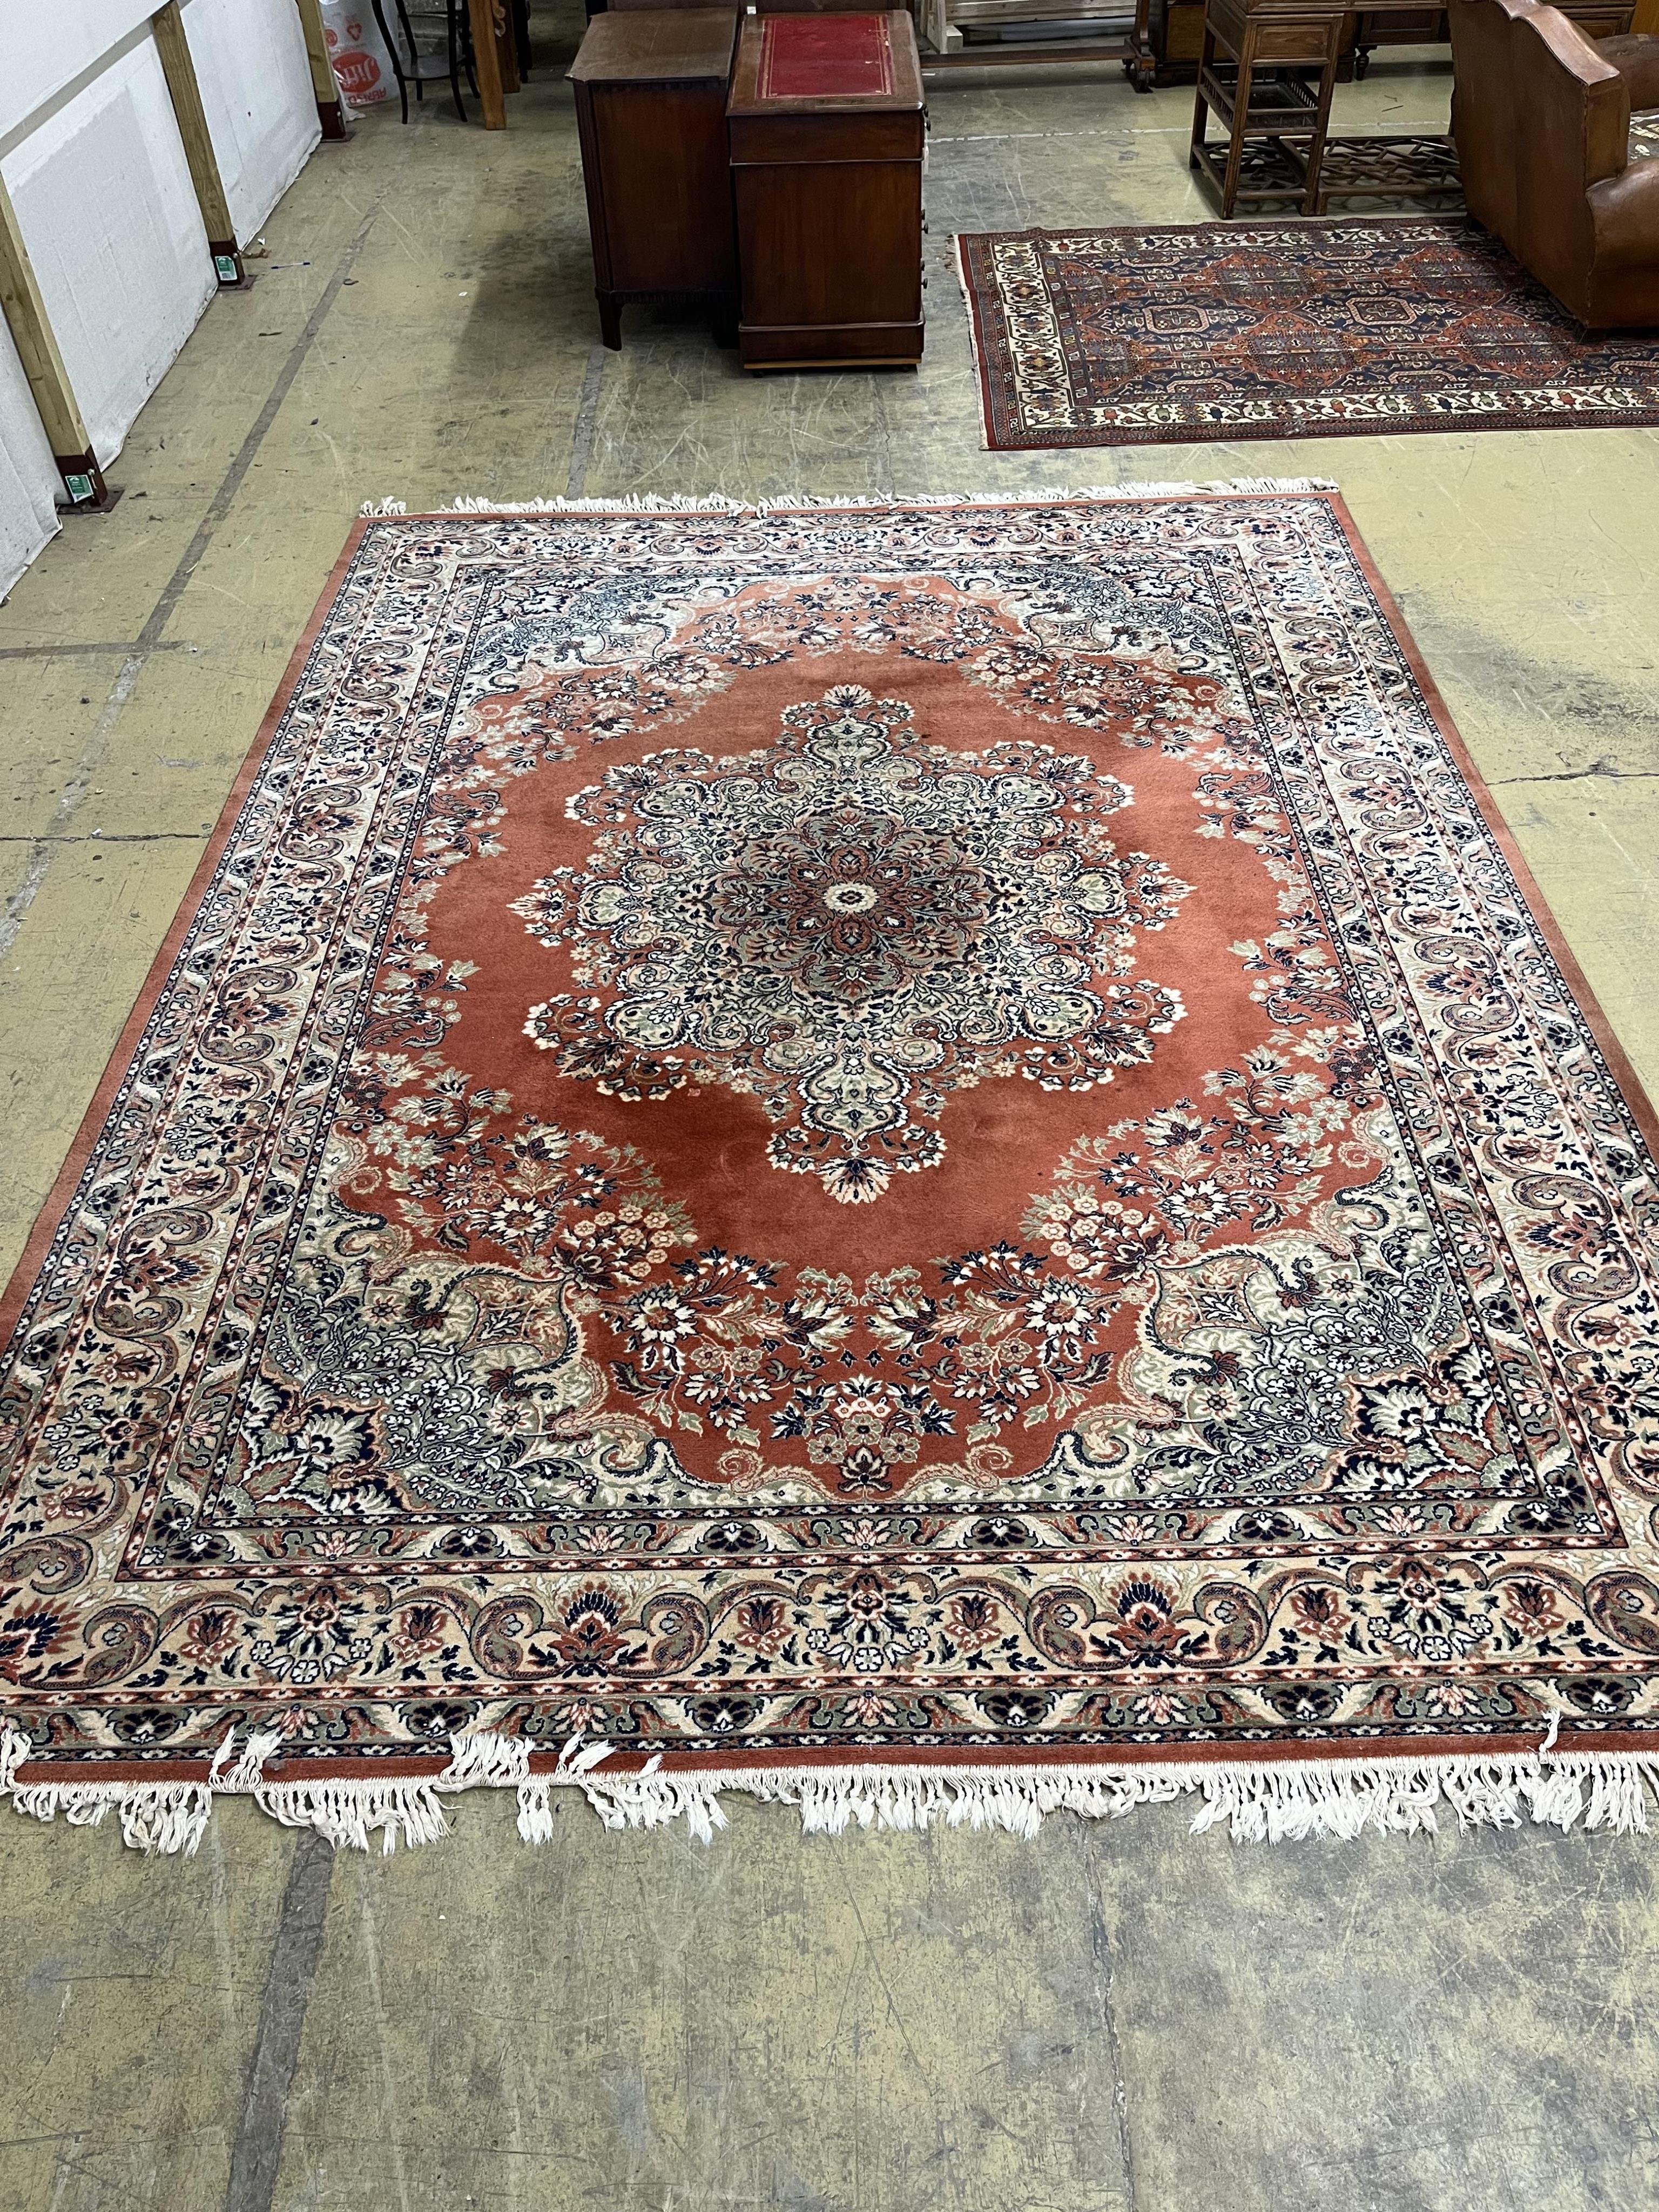 A North West Persian style red ground carpet, 360 x 280cm. Condition - poor